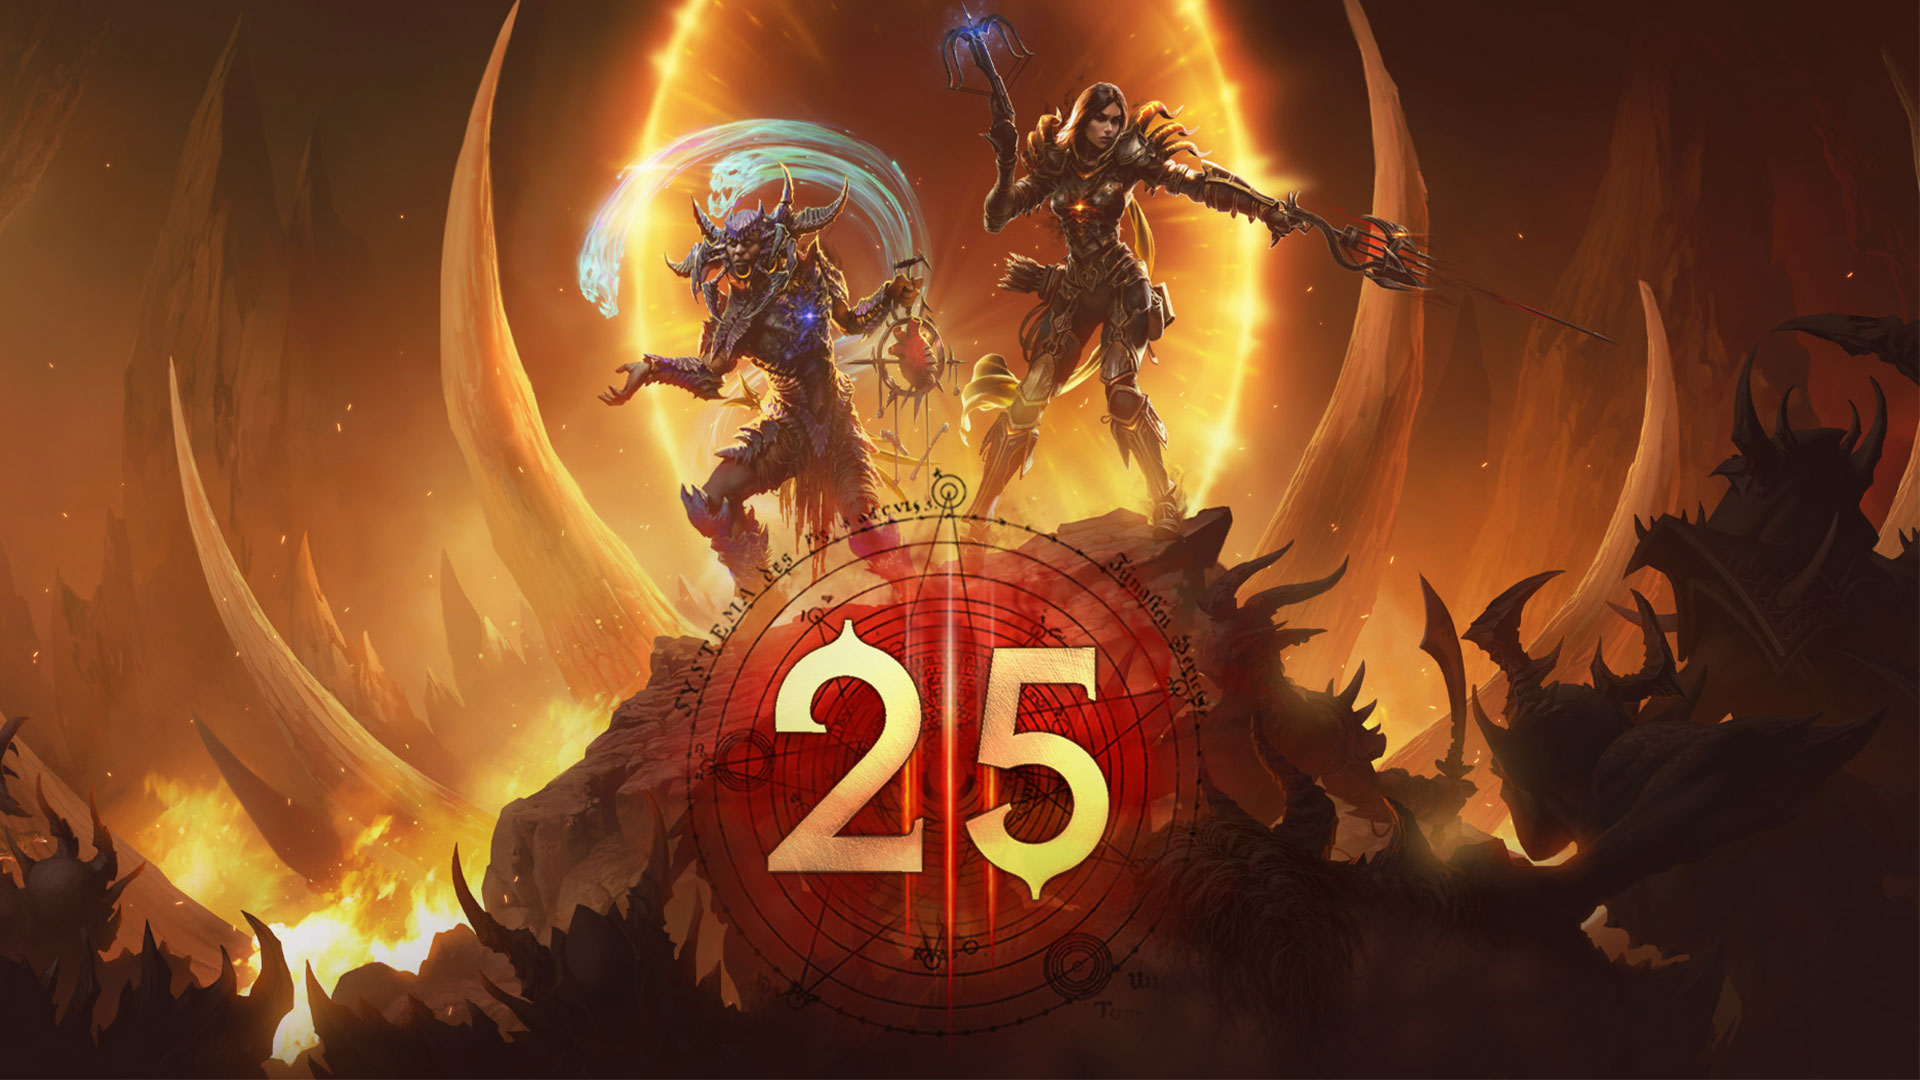 Diablo 3 When does Season 25 end and when does Season 26 start? Our